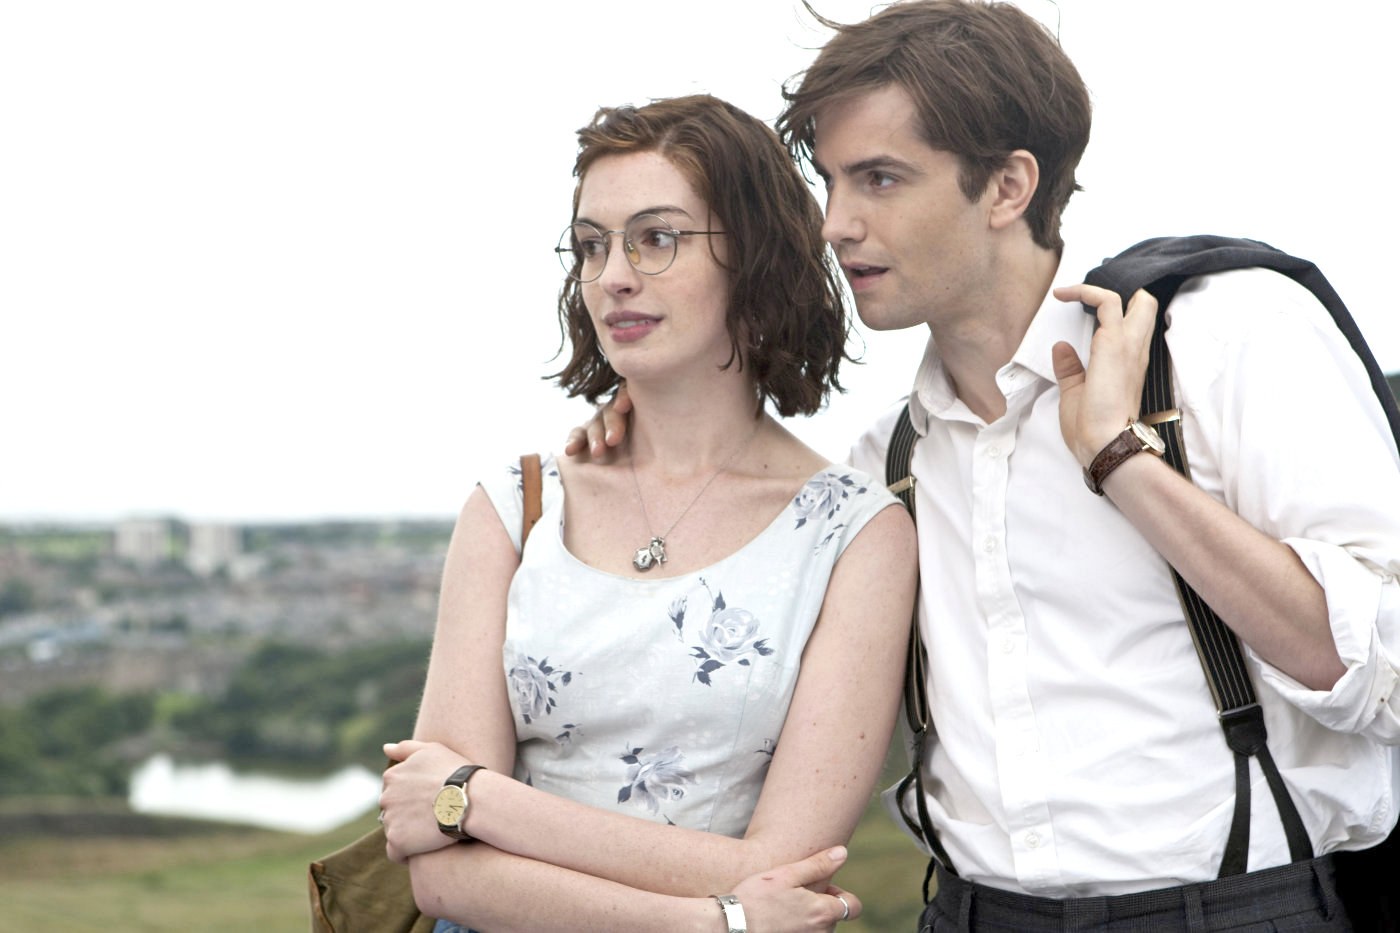 Anne Hathaway stars as Emma Morley and Jim Sturgess stars as Dexter Mayhew in Focus Features' One Day (2011)